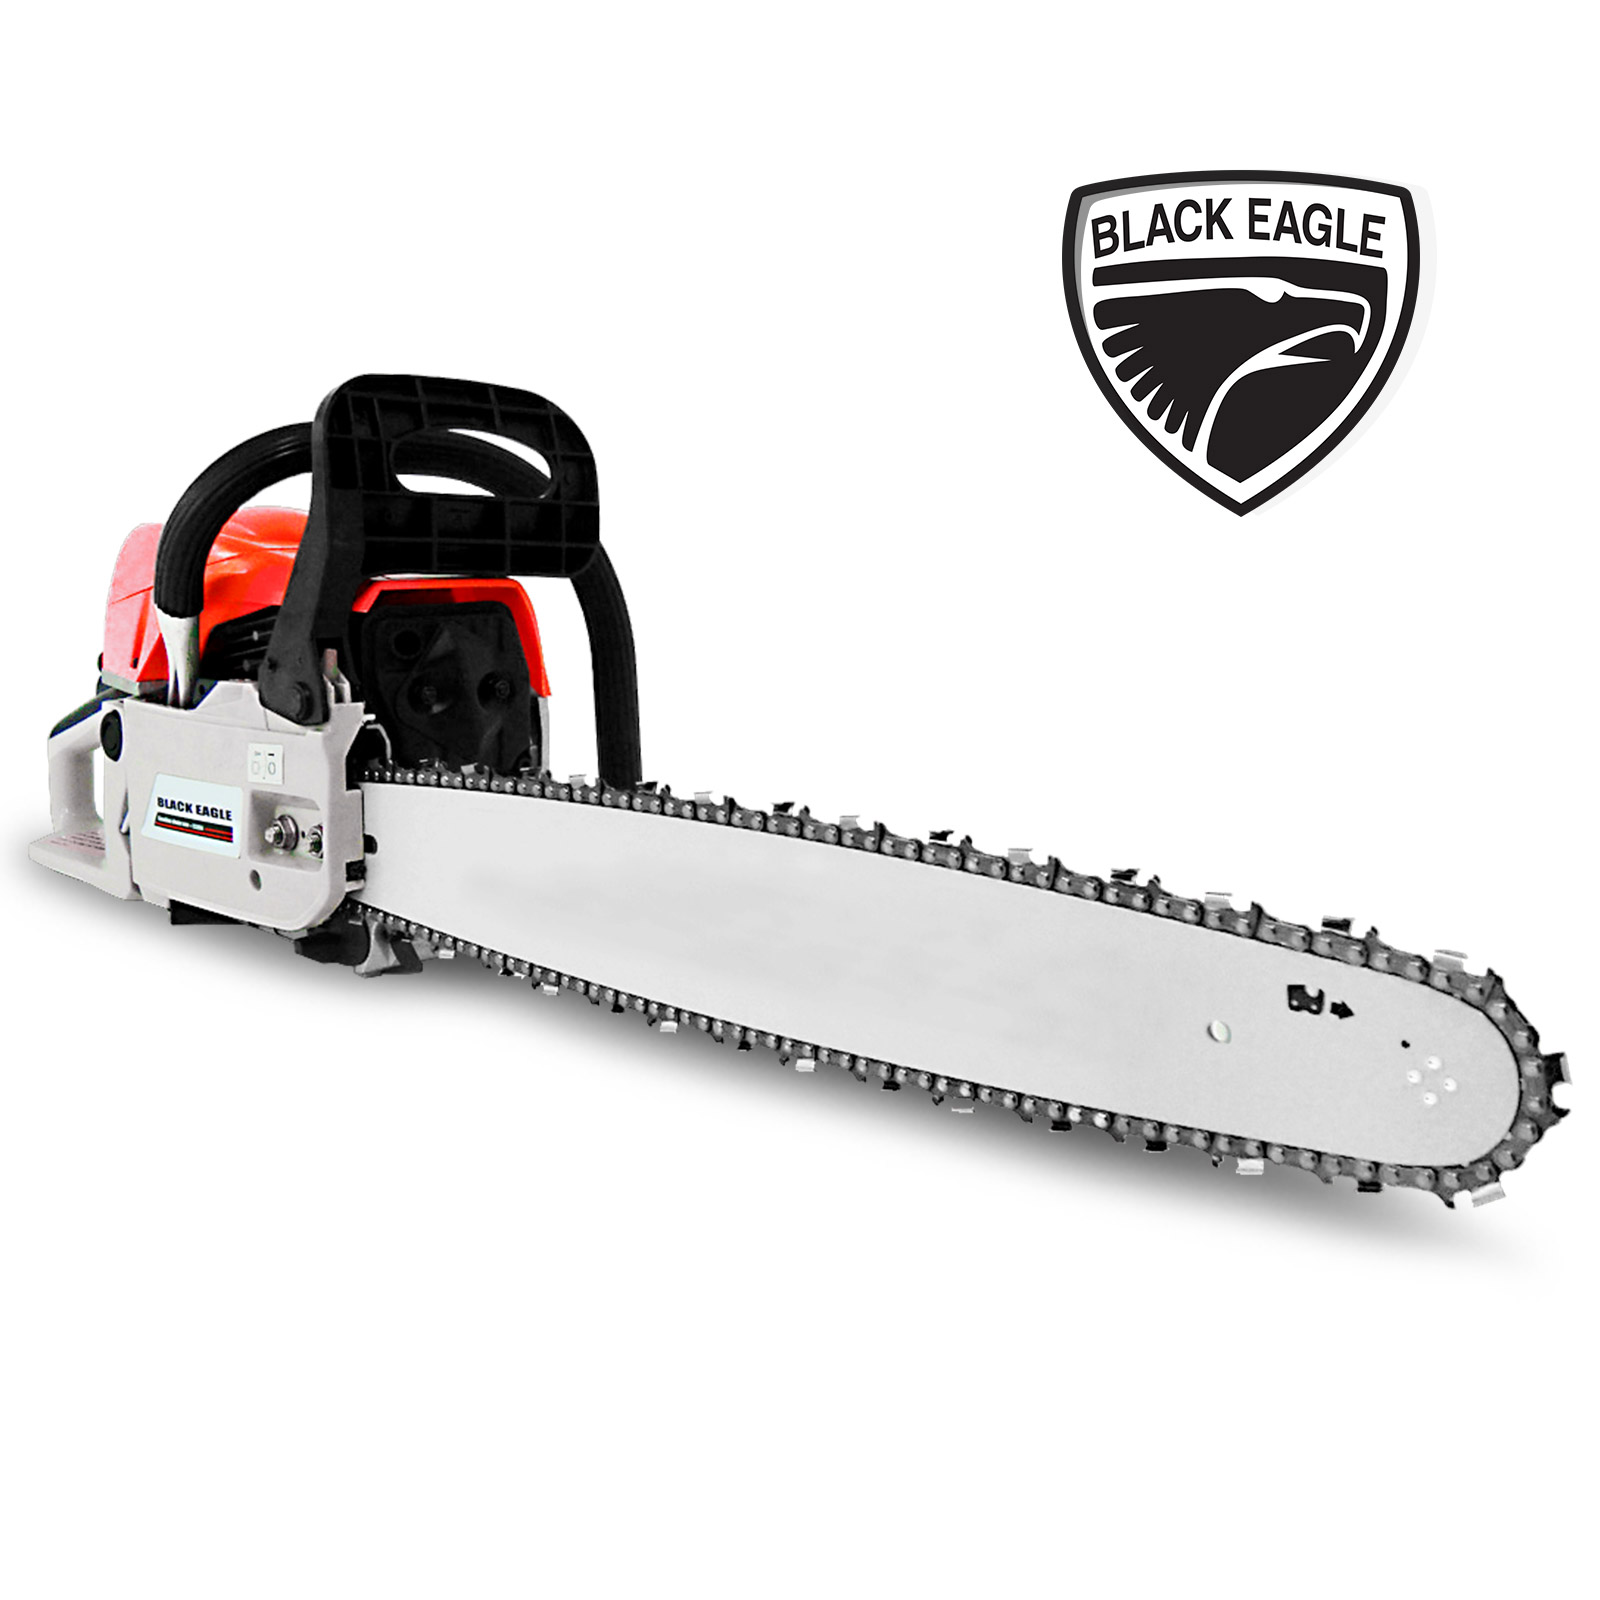 NEW BlackEagle 58cc Commercial Petrol Chainsaw EStart 20" Chain Saw Tree Pruning